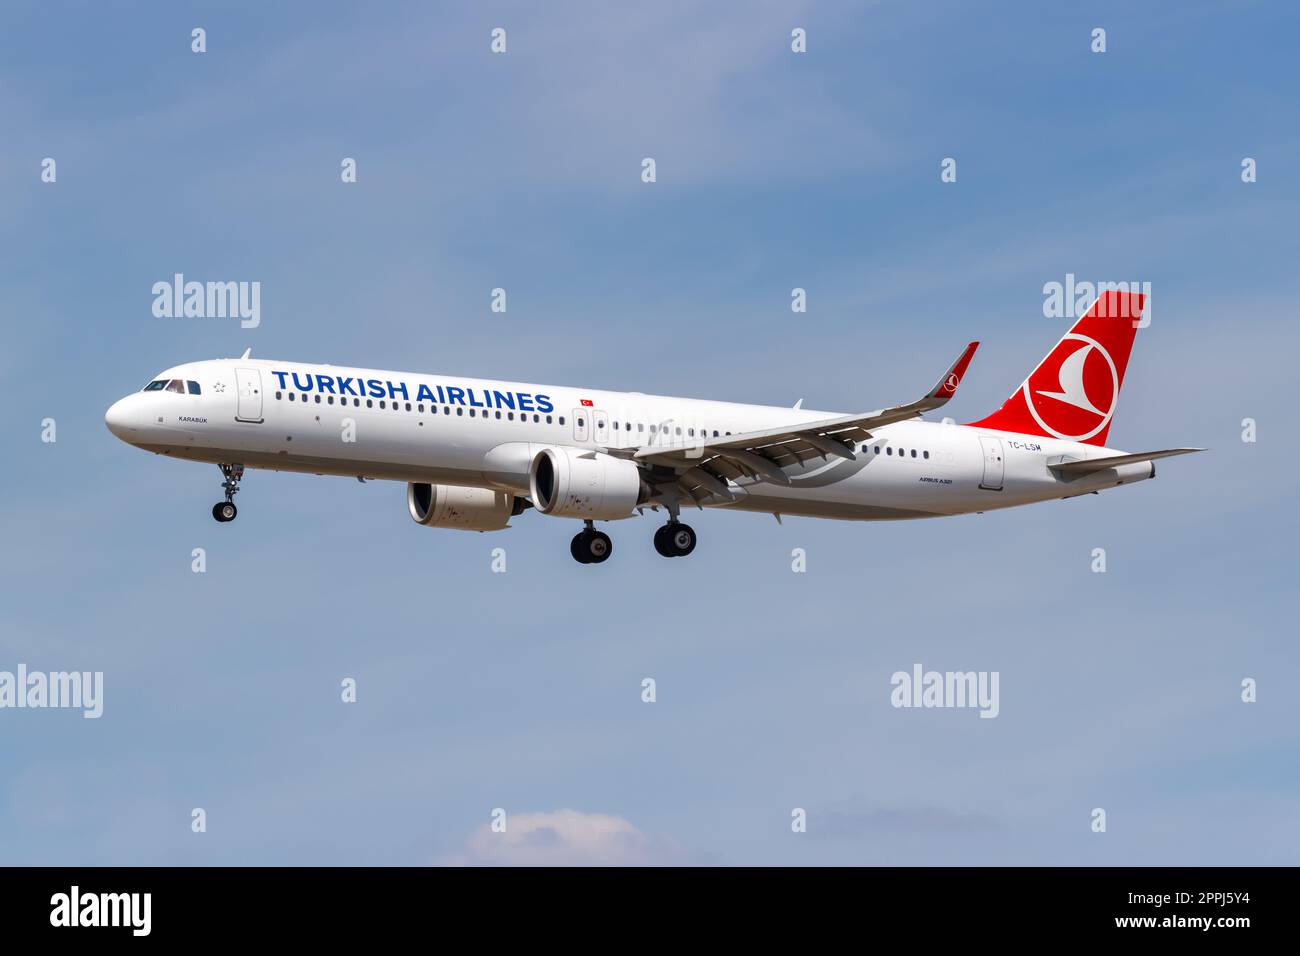 Turkish Airlines Airbus A321neo airplane at Frankfurt airport in Germany Stock Photo